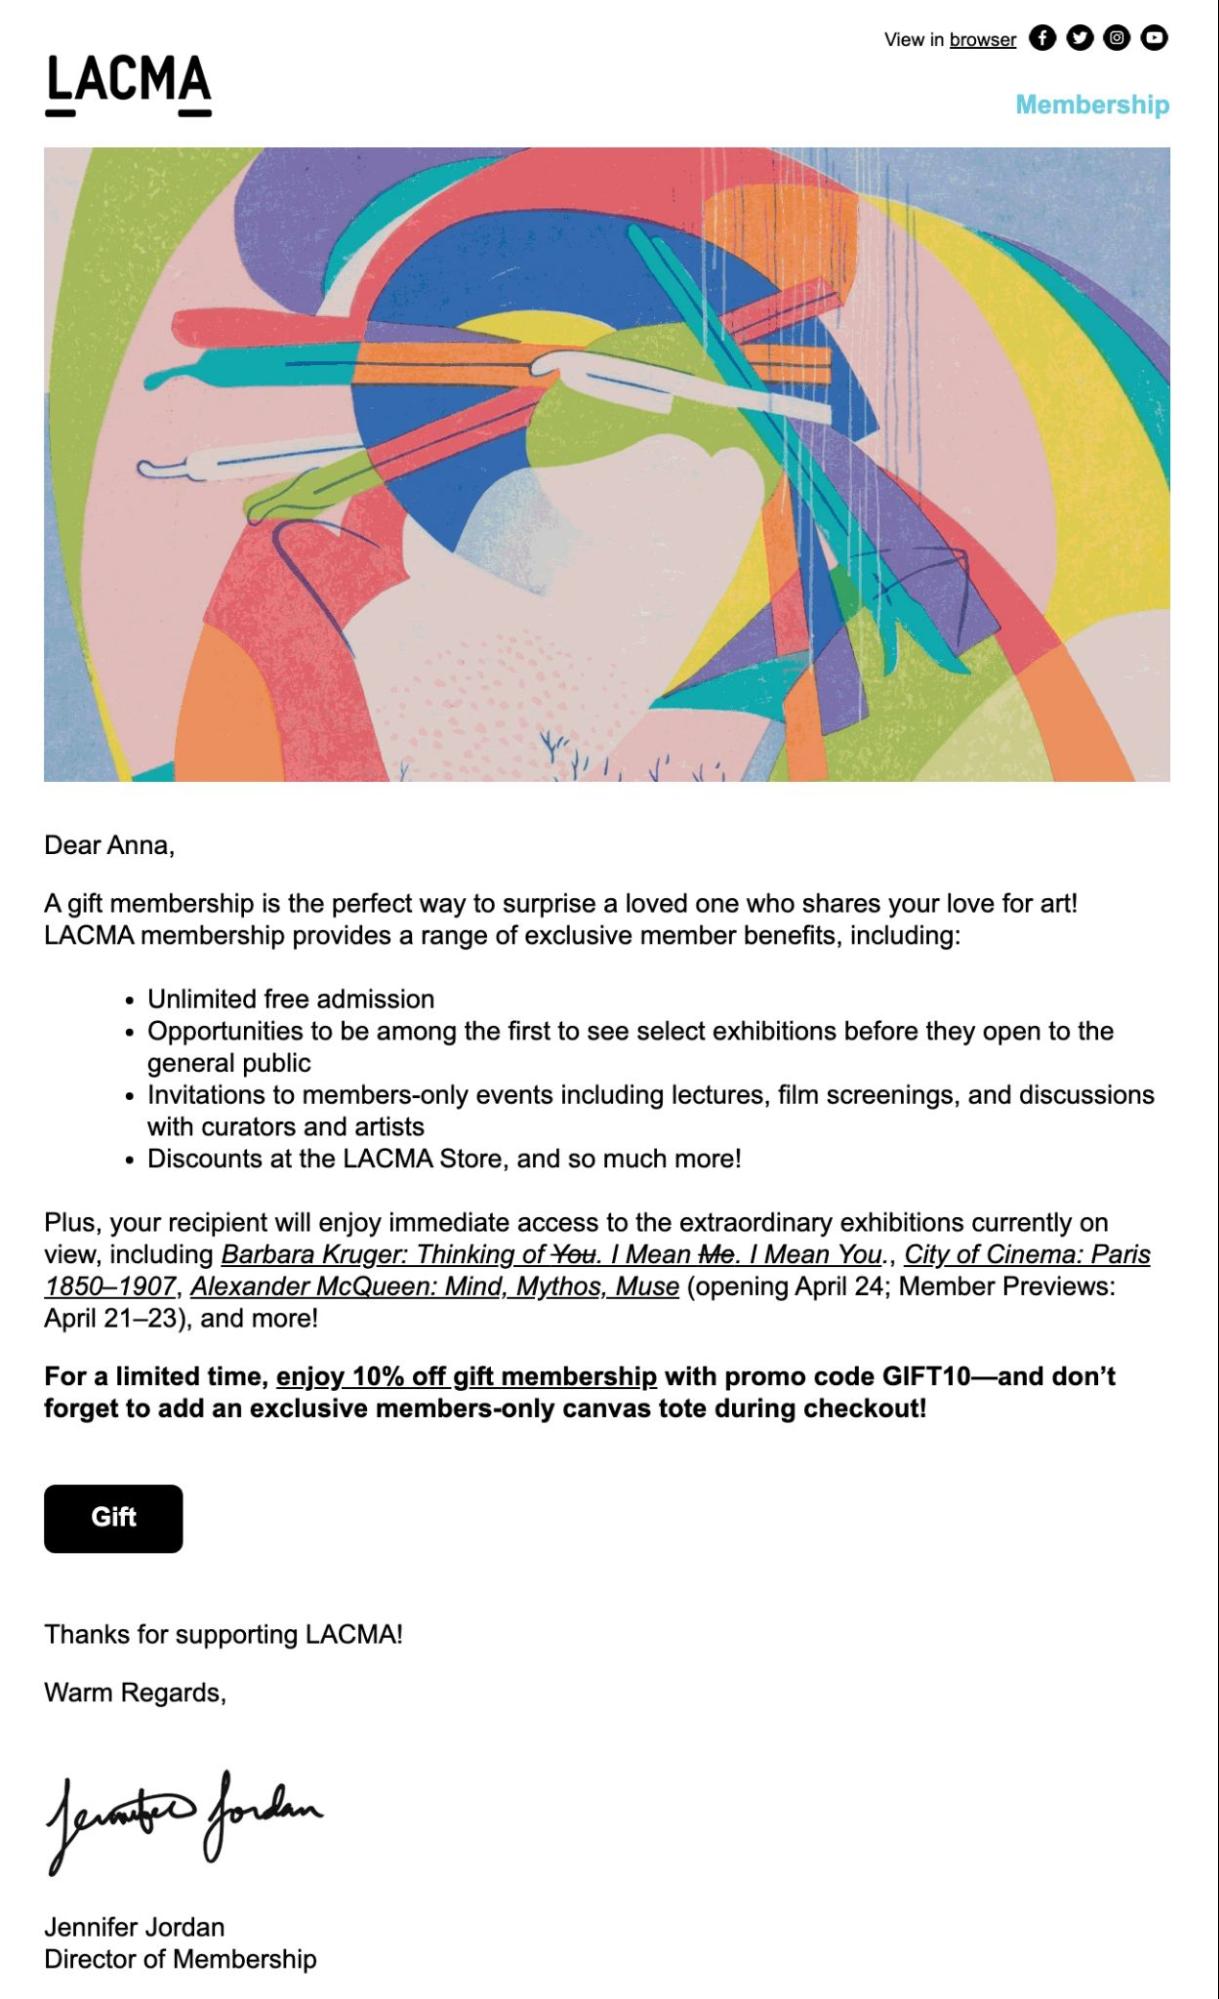 LACMA promotional email example